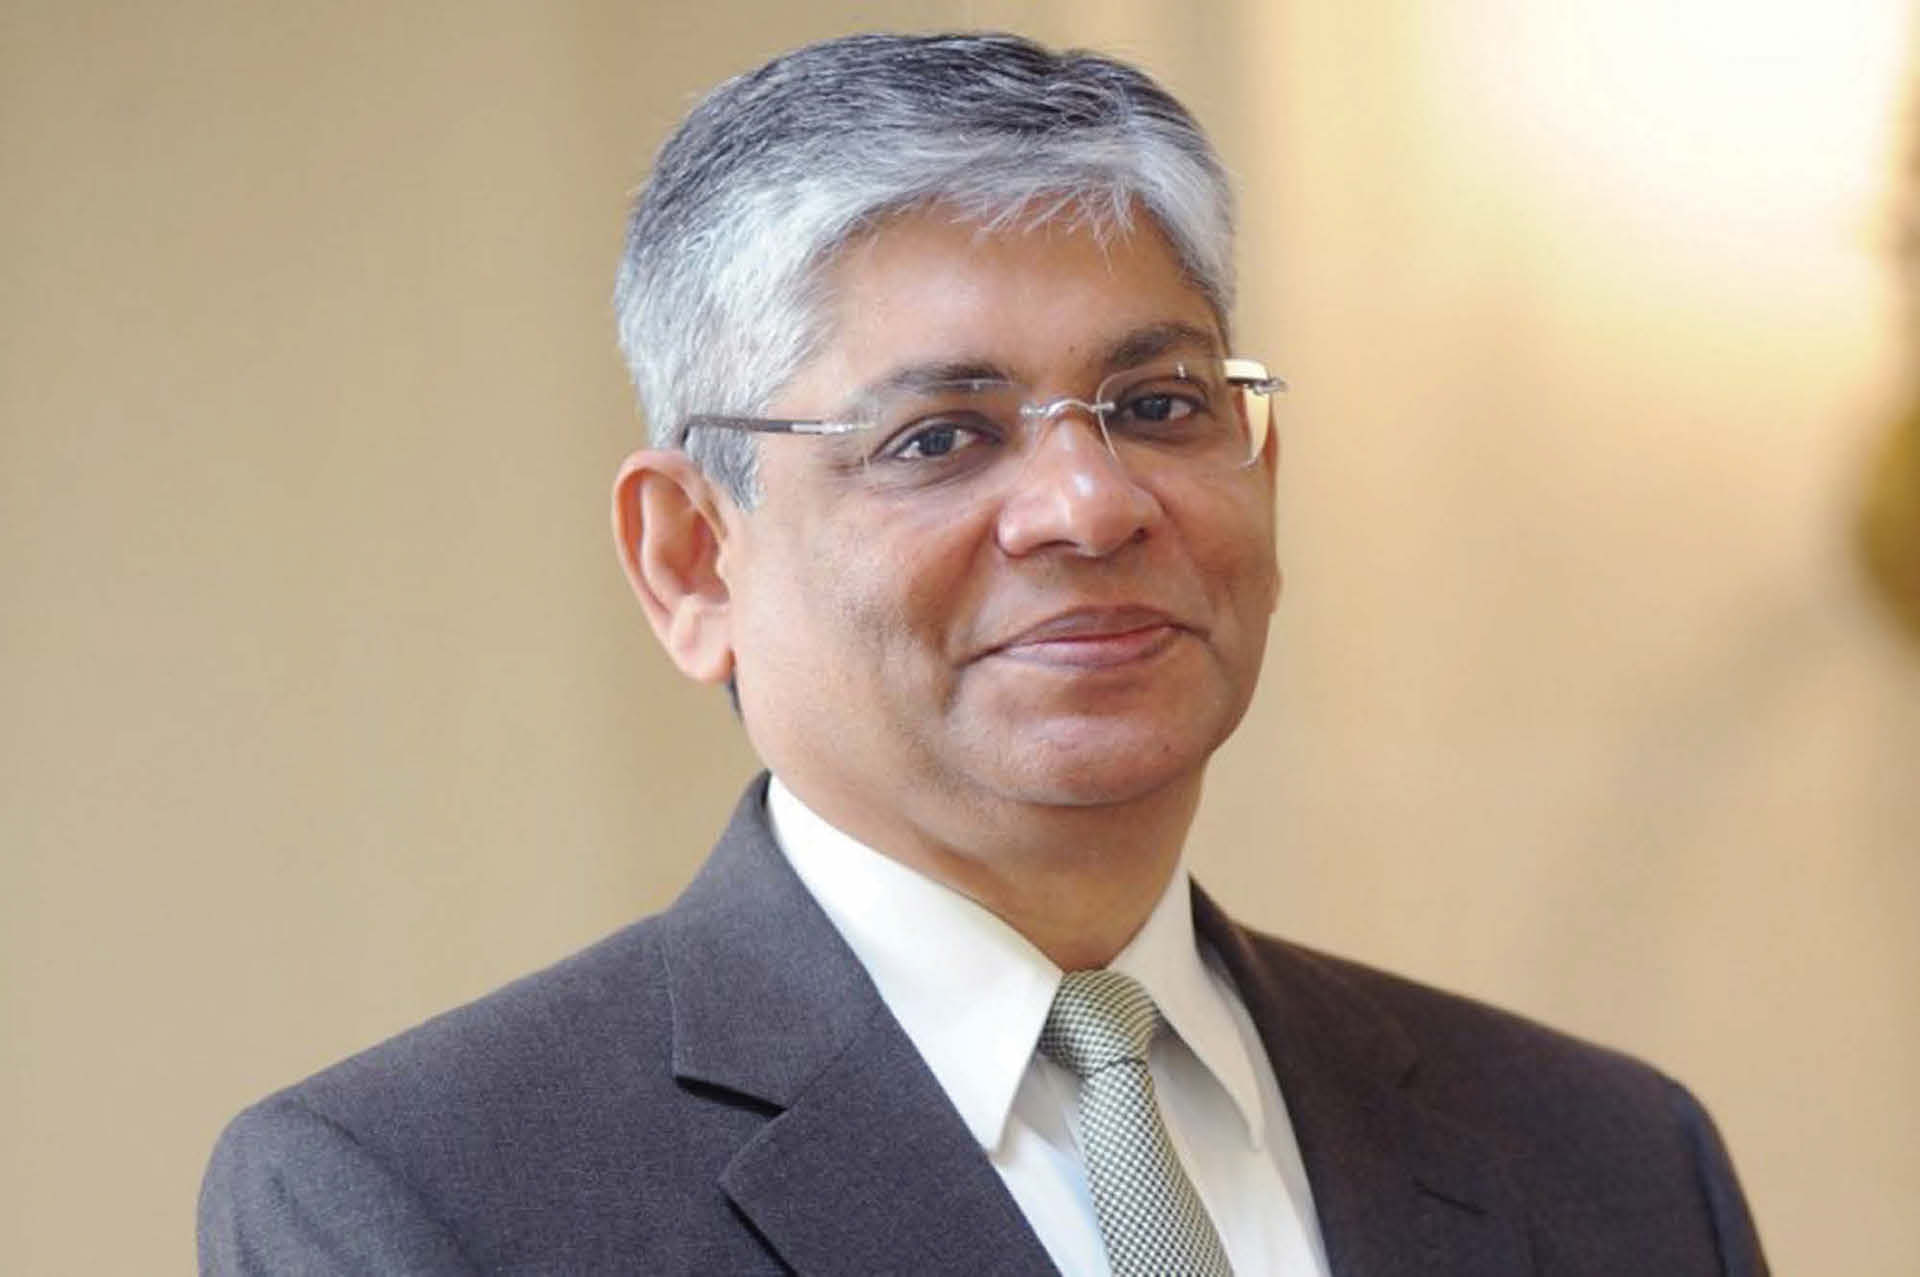 India's Ambassador to the United States Arun Singh will address the kick off press conference of AAPI Convention & Scientific Assembly at the Indian Consulate in New York on February 12